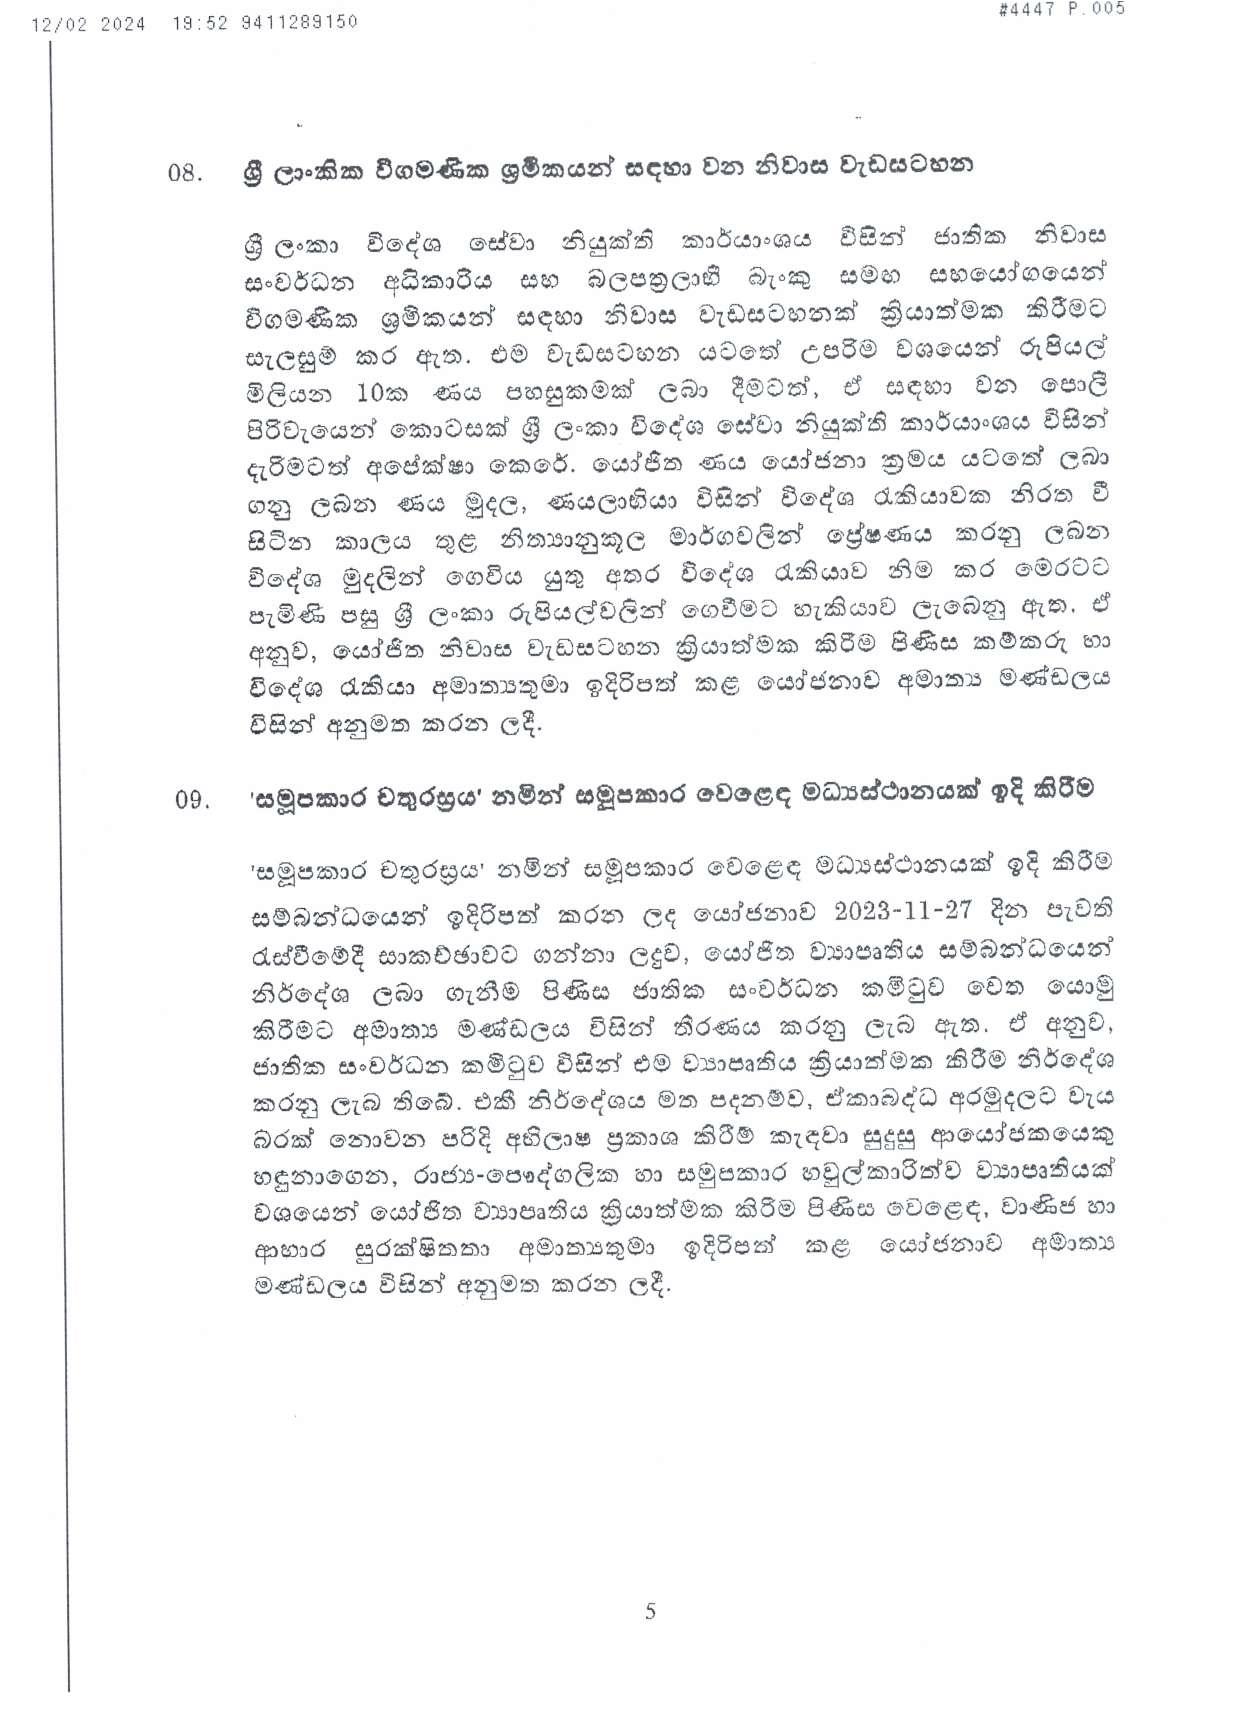 Cabient Decision on 12.02.2024 page 005